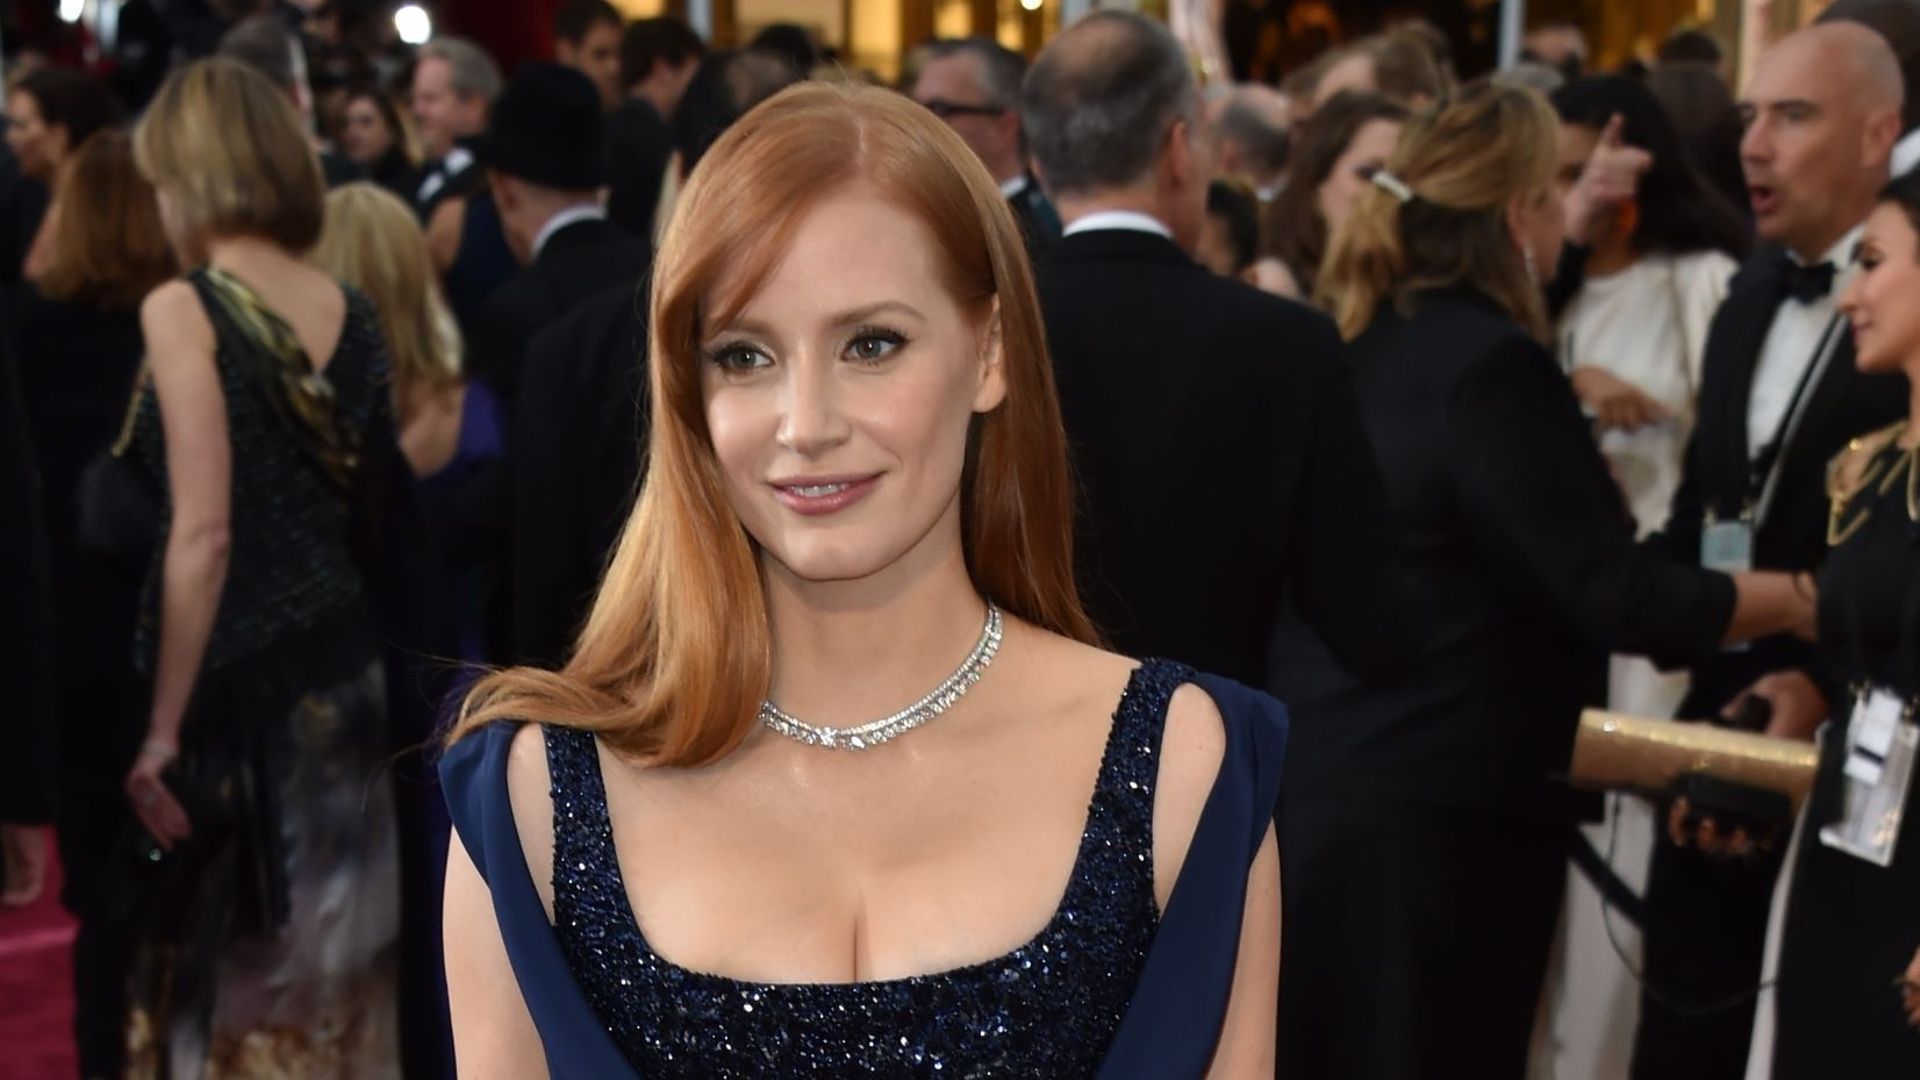 Jessica Chastain, héroïne contre l'invasion nazie dans "The Zookeeper's Wife"